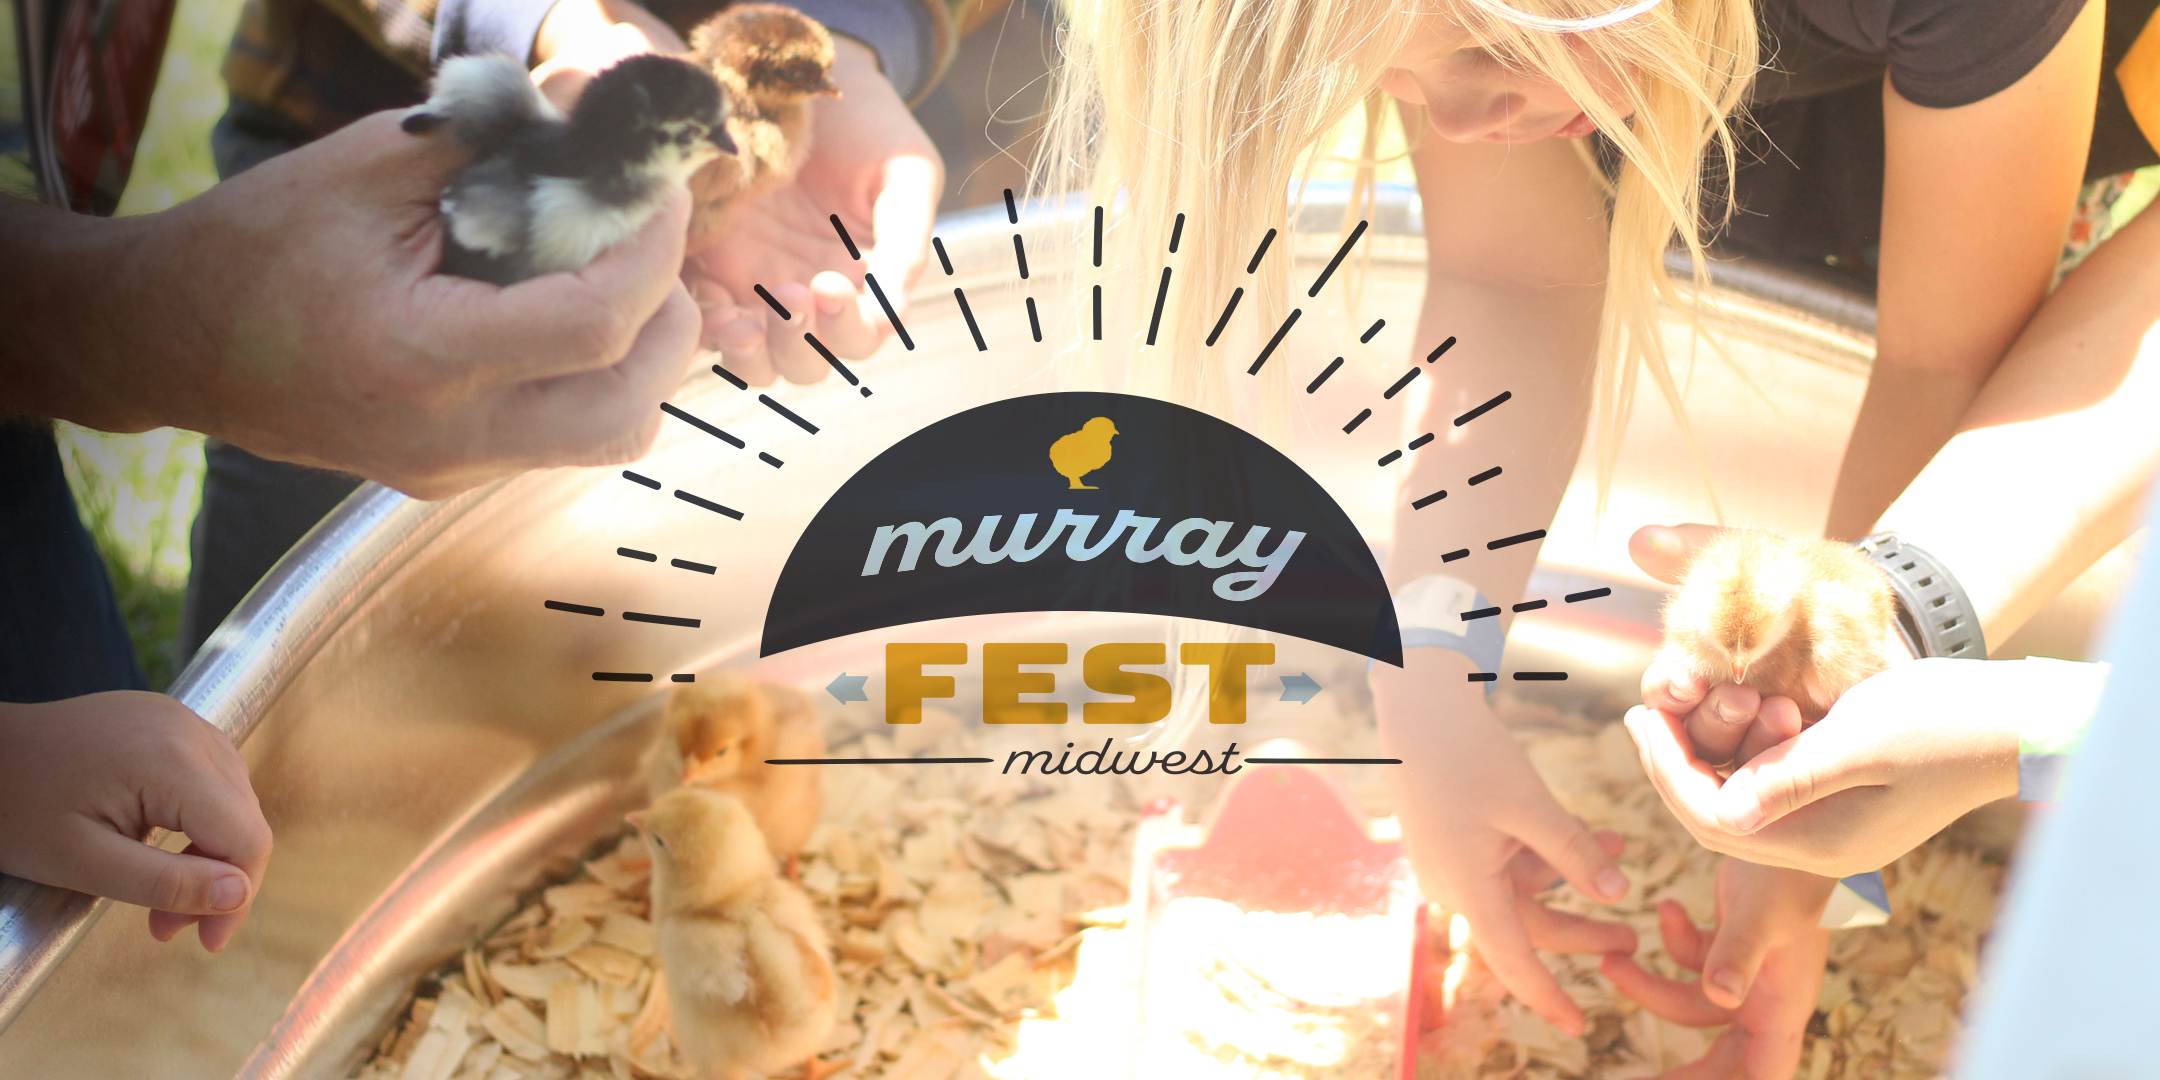 Murray Fest Midwest | The Midwest's Premier Poultry & Homesteading Festival